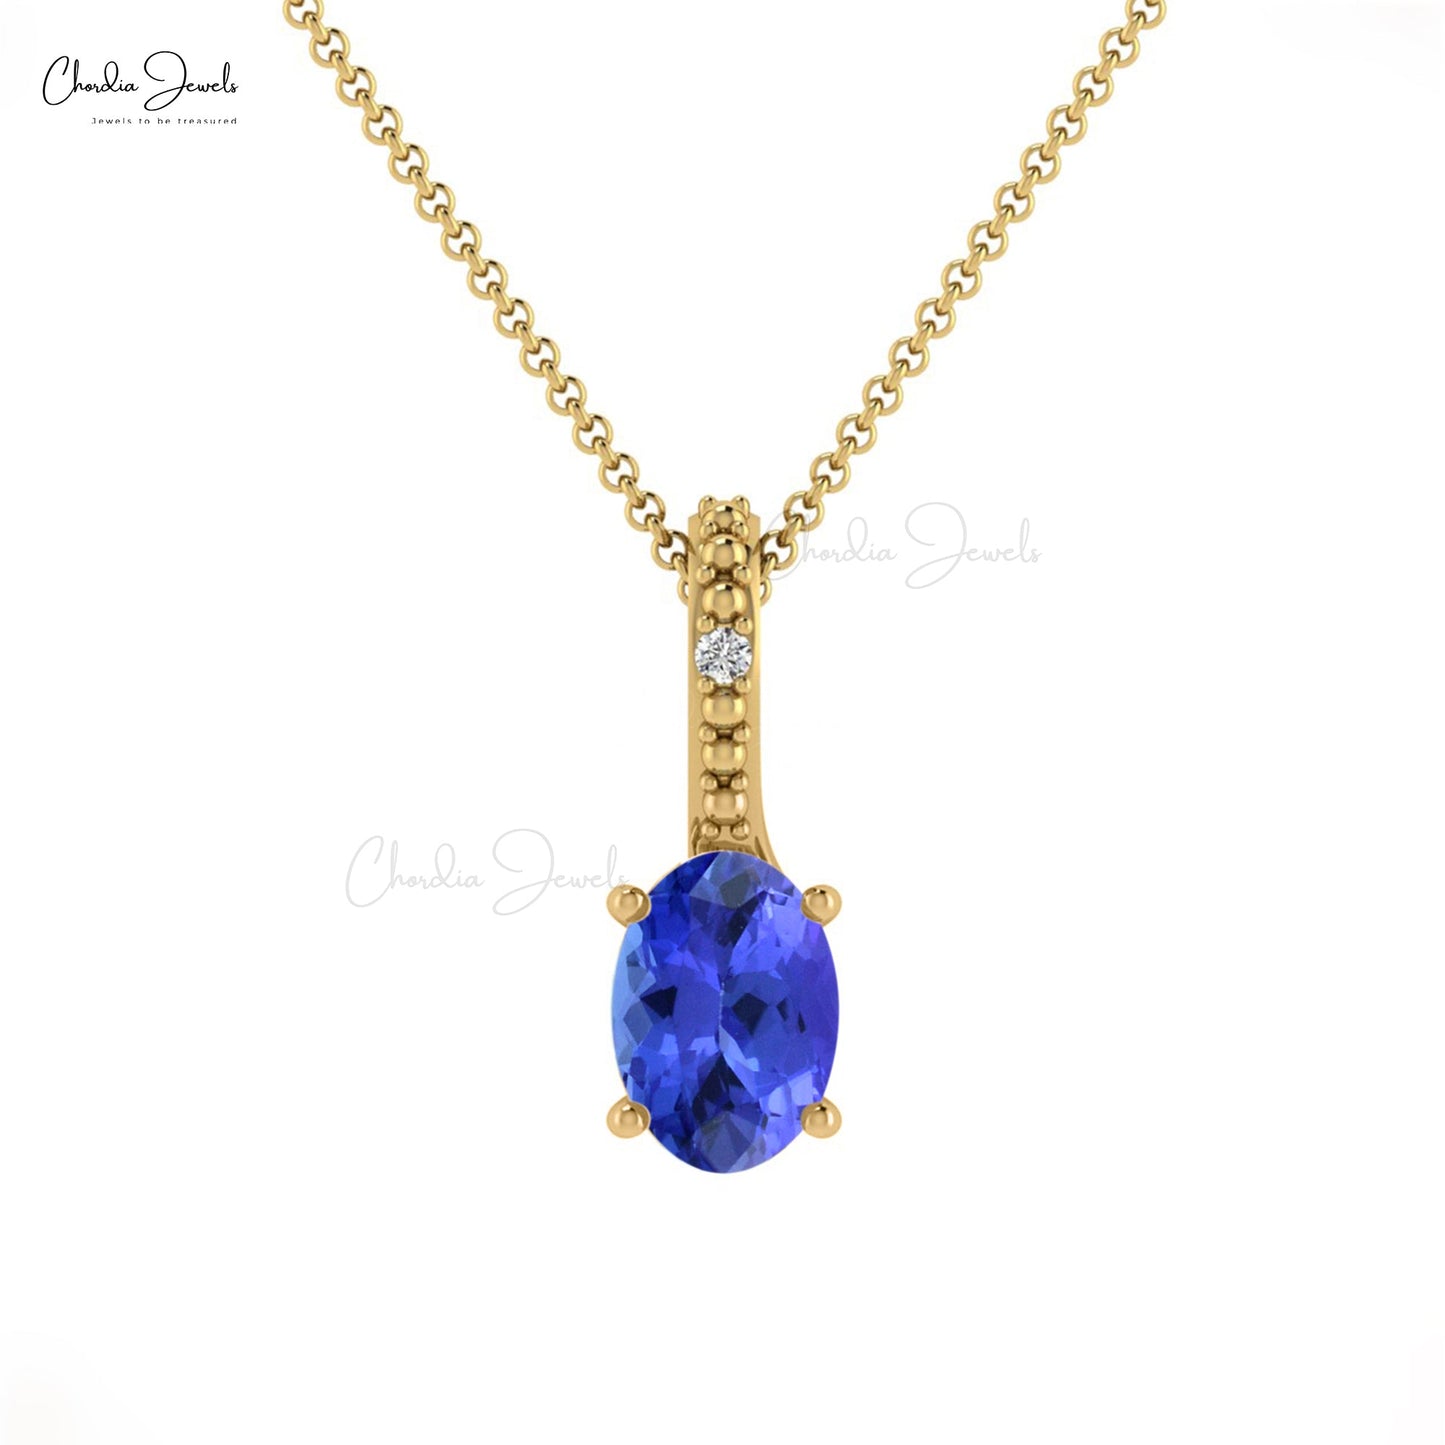 Trendy Stylish Hidden Bail Pendant Natural Tanzanite and White Diamond Pendant Necklace in 14k Solid Gold Anniversary Gift For Wife